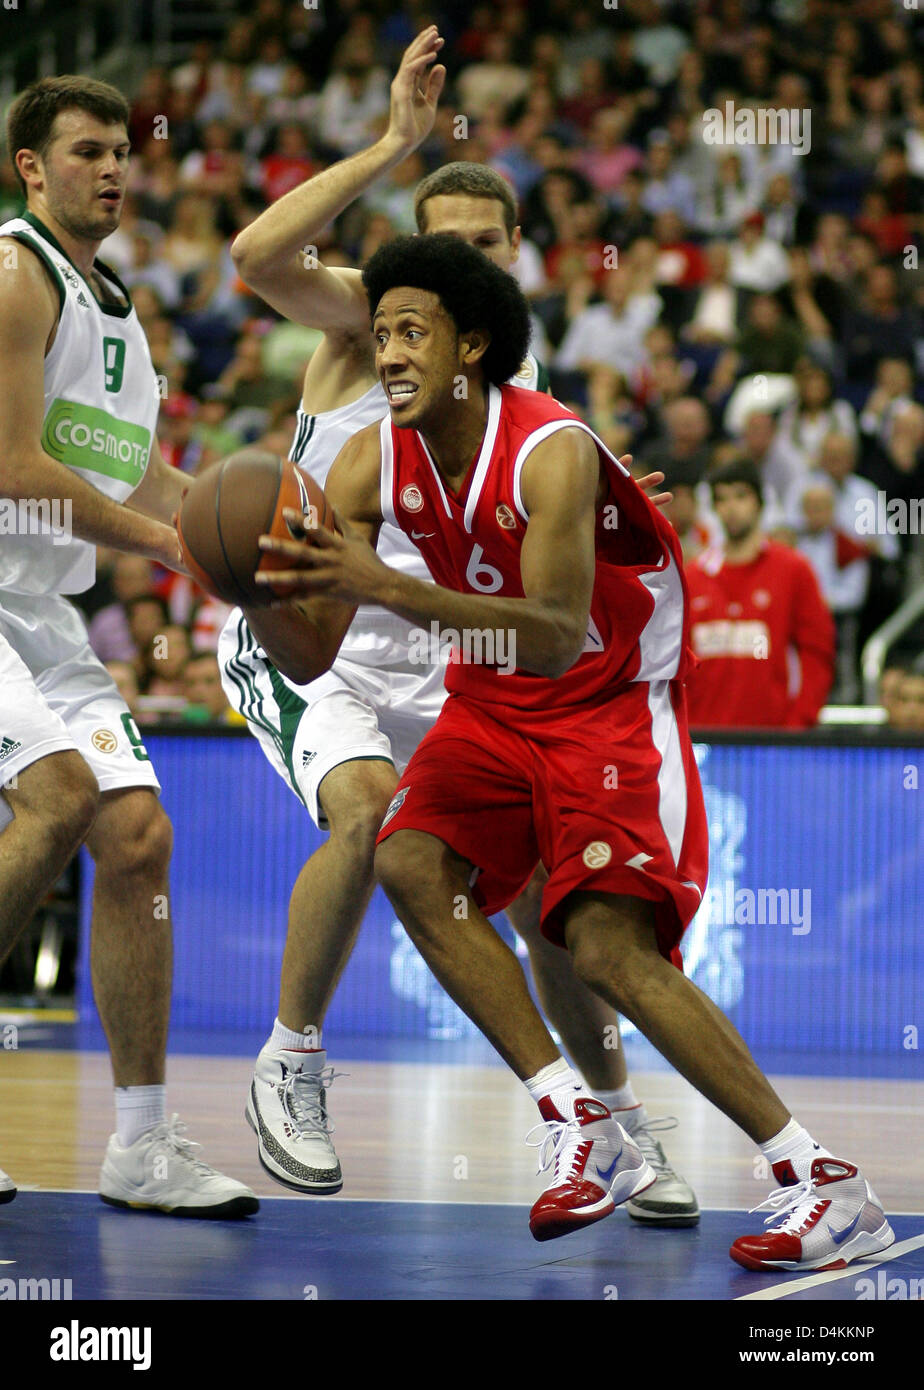 Olympiakos?s Josh Childress controls the ball during the EuroLeague  semi-finals match Olympiacos Piraeus vs Panathinaikos Athens in Berlin,  Germany, 01 May 2009. Panathinaikos won the match 84-82 and moves up to the